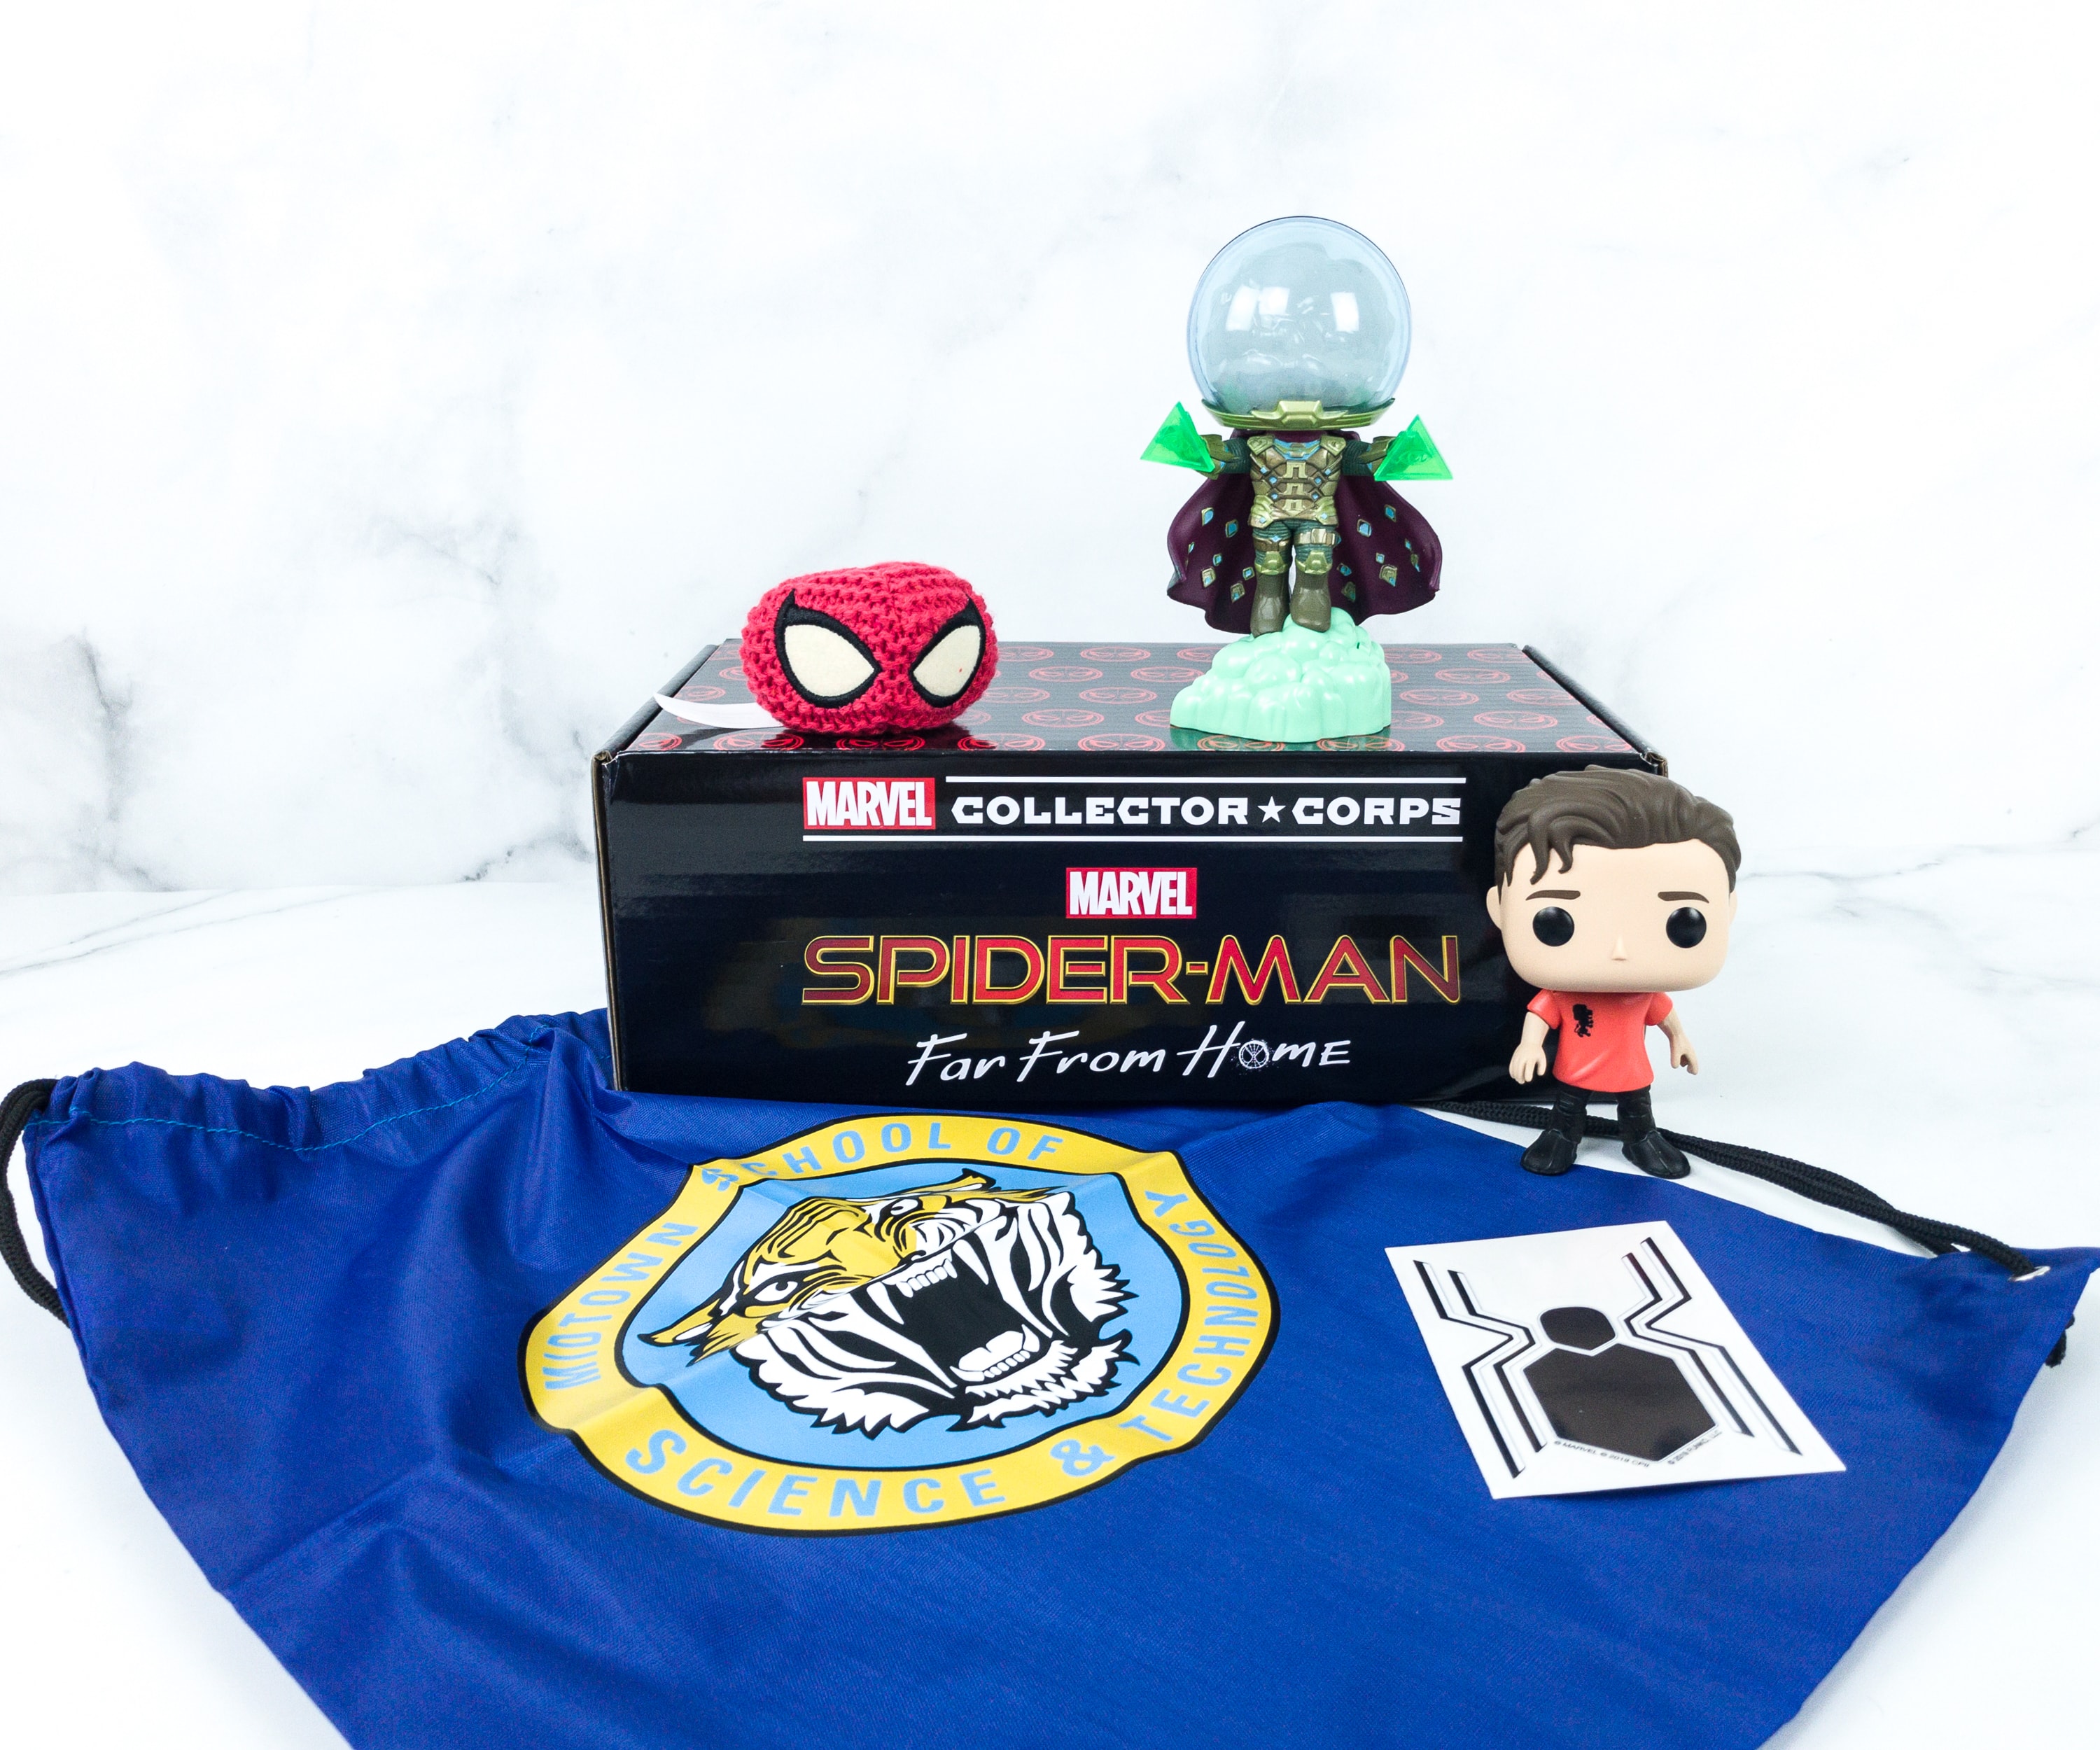 FUNKO POP COLLECTOR CORPS MARVEL SPIDER-MAN FAR FROM HOME 